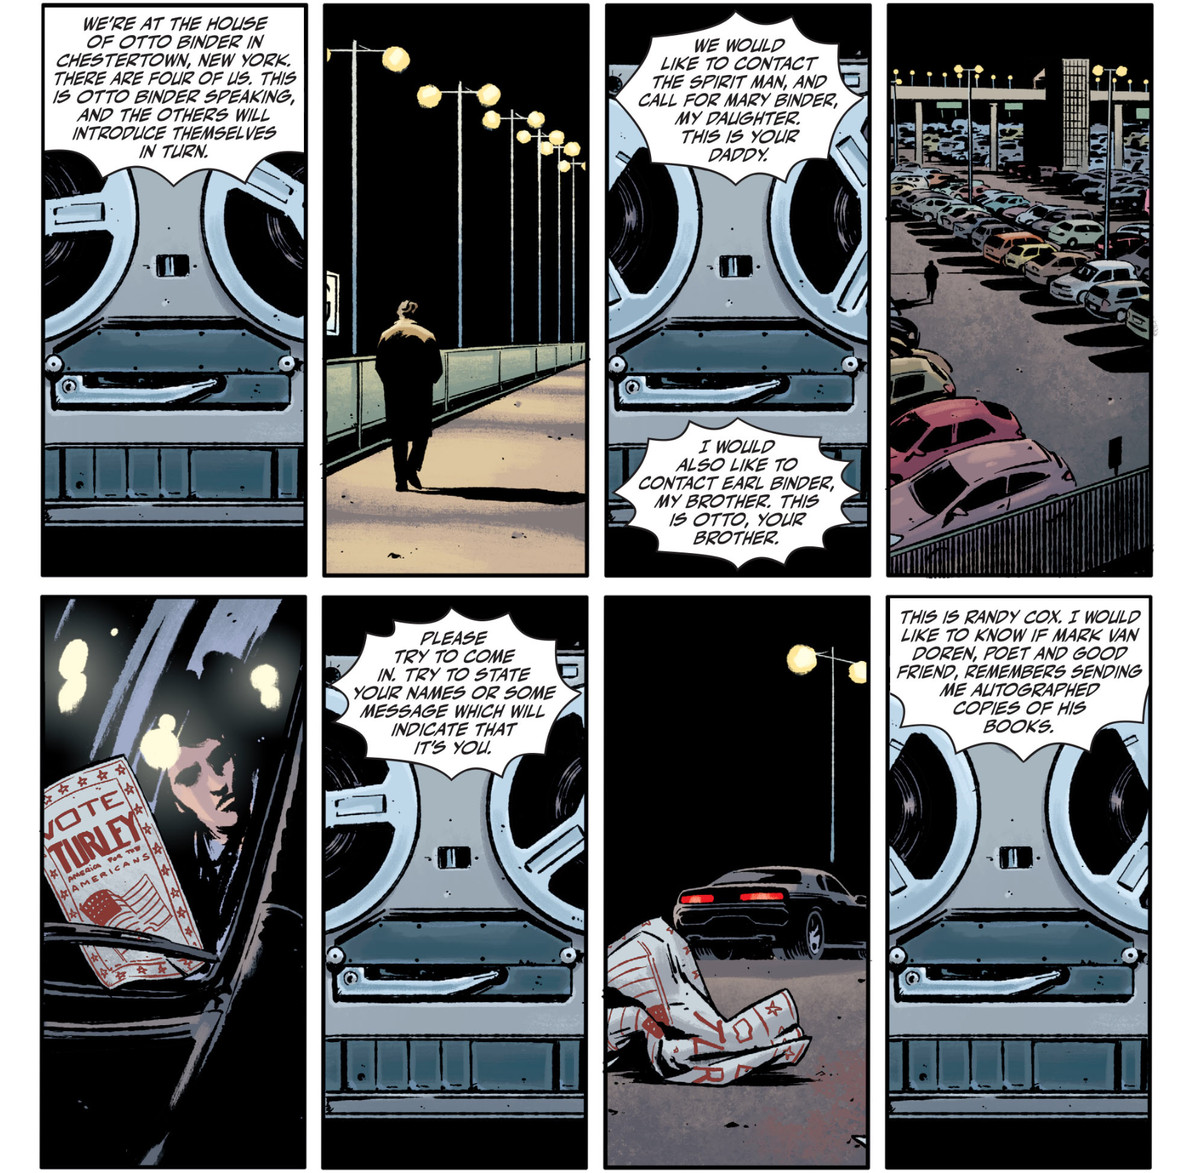 A recording made by attendees of a seance — including Otto Binder and a man asking for Mark Van Doren plays over images of a character getting into his car in a parking lot in Rorschach #1, DC Comics (2020). 